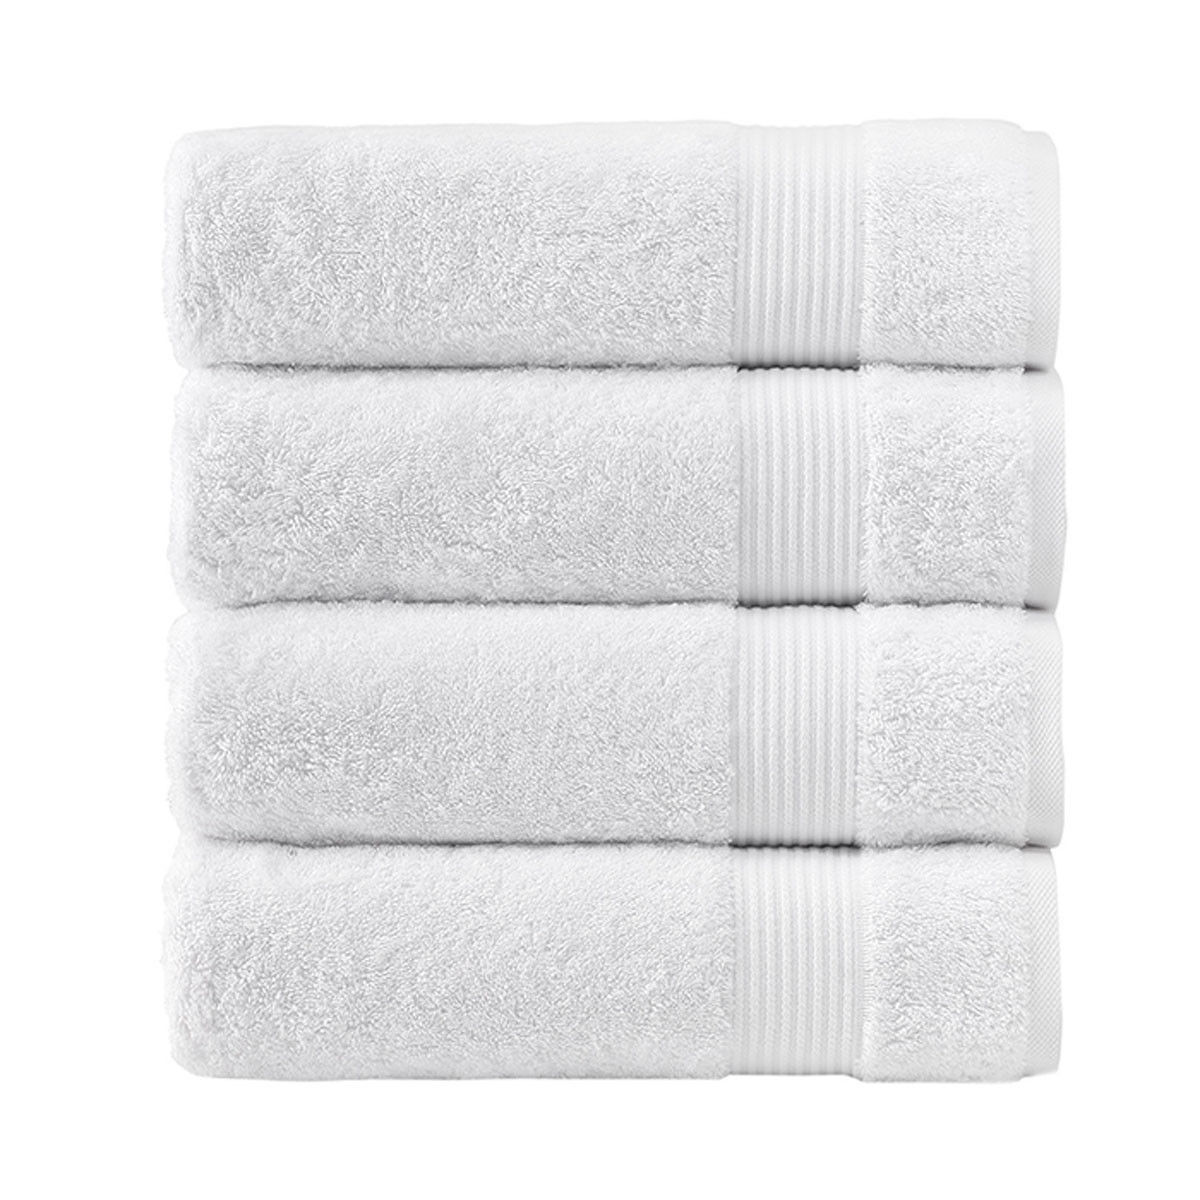 What fabric is used for the bulk Turkish blankets in the Amadeus Turkish White Towel Collection?